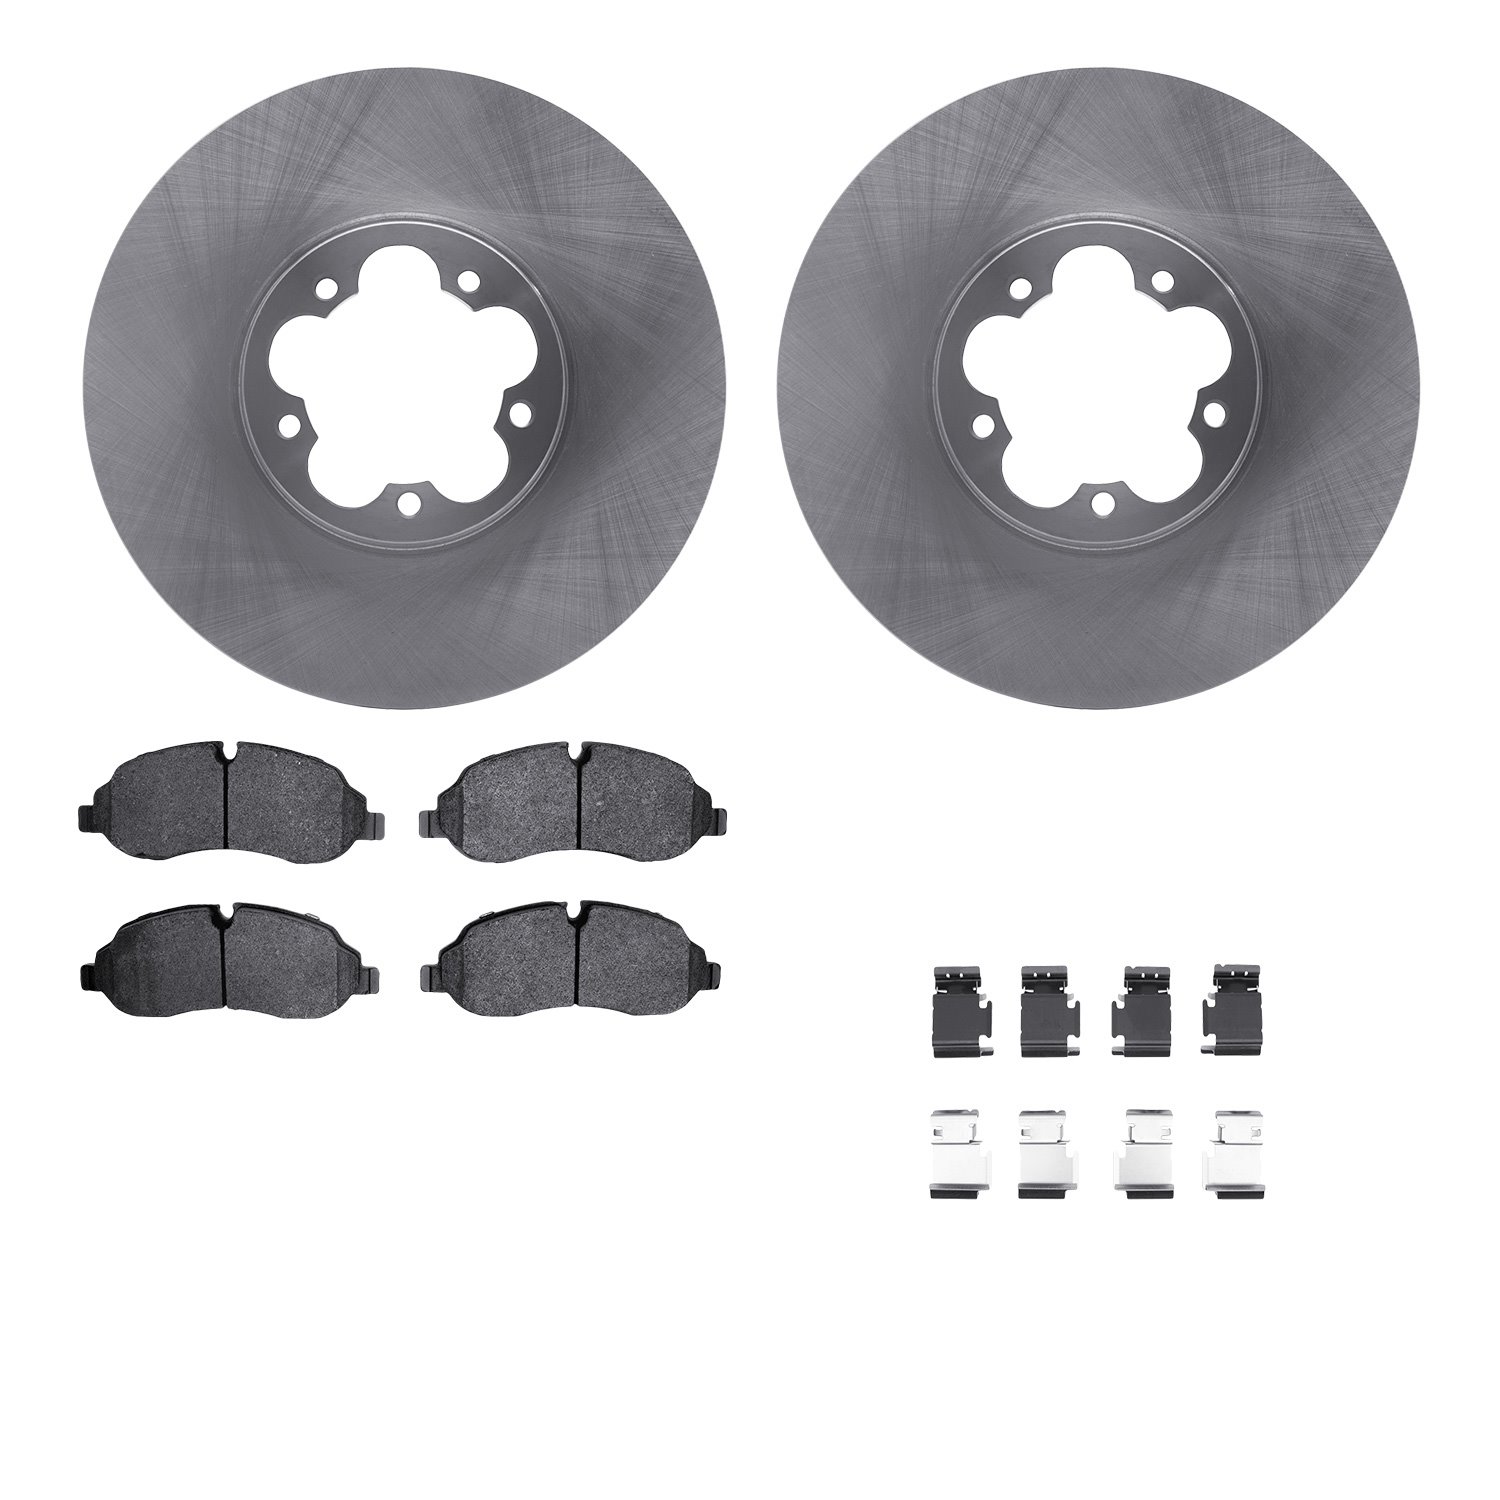 6212-99723 Brake Rotors w/Heavy-Duty Brake Pads Kit & Hardware, Fits Select Ford/Lincoln/Mercury/Mazda, Position: Front